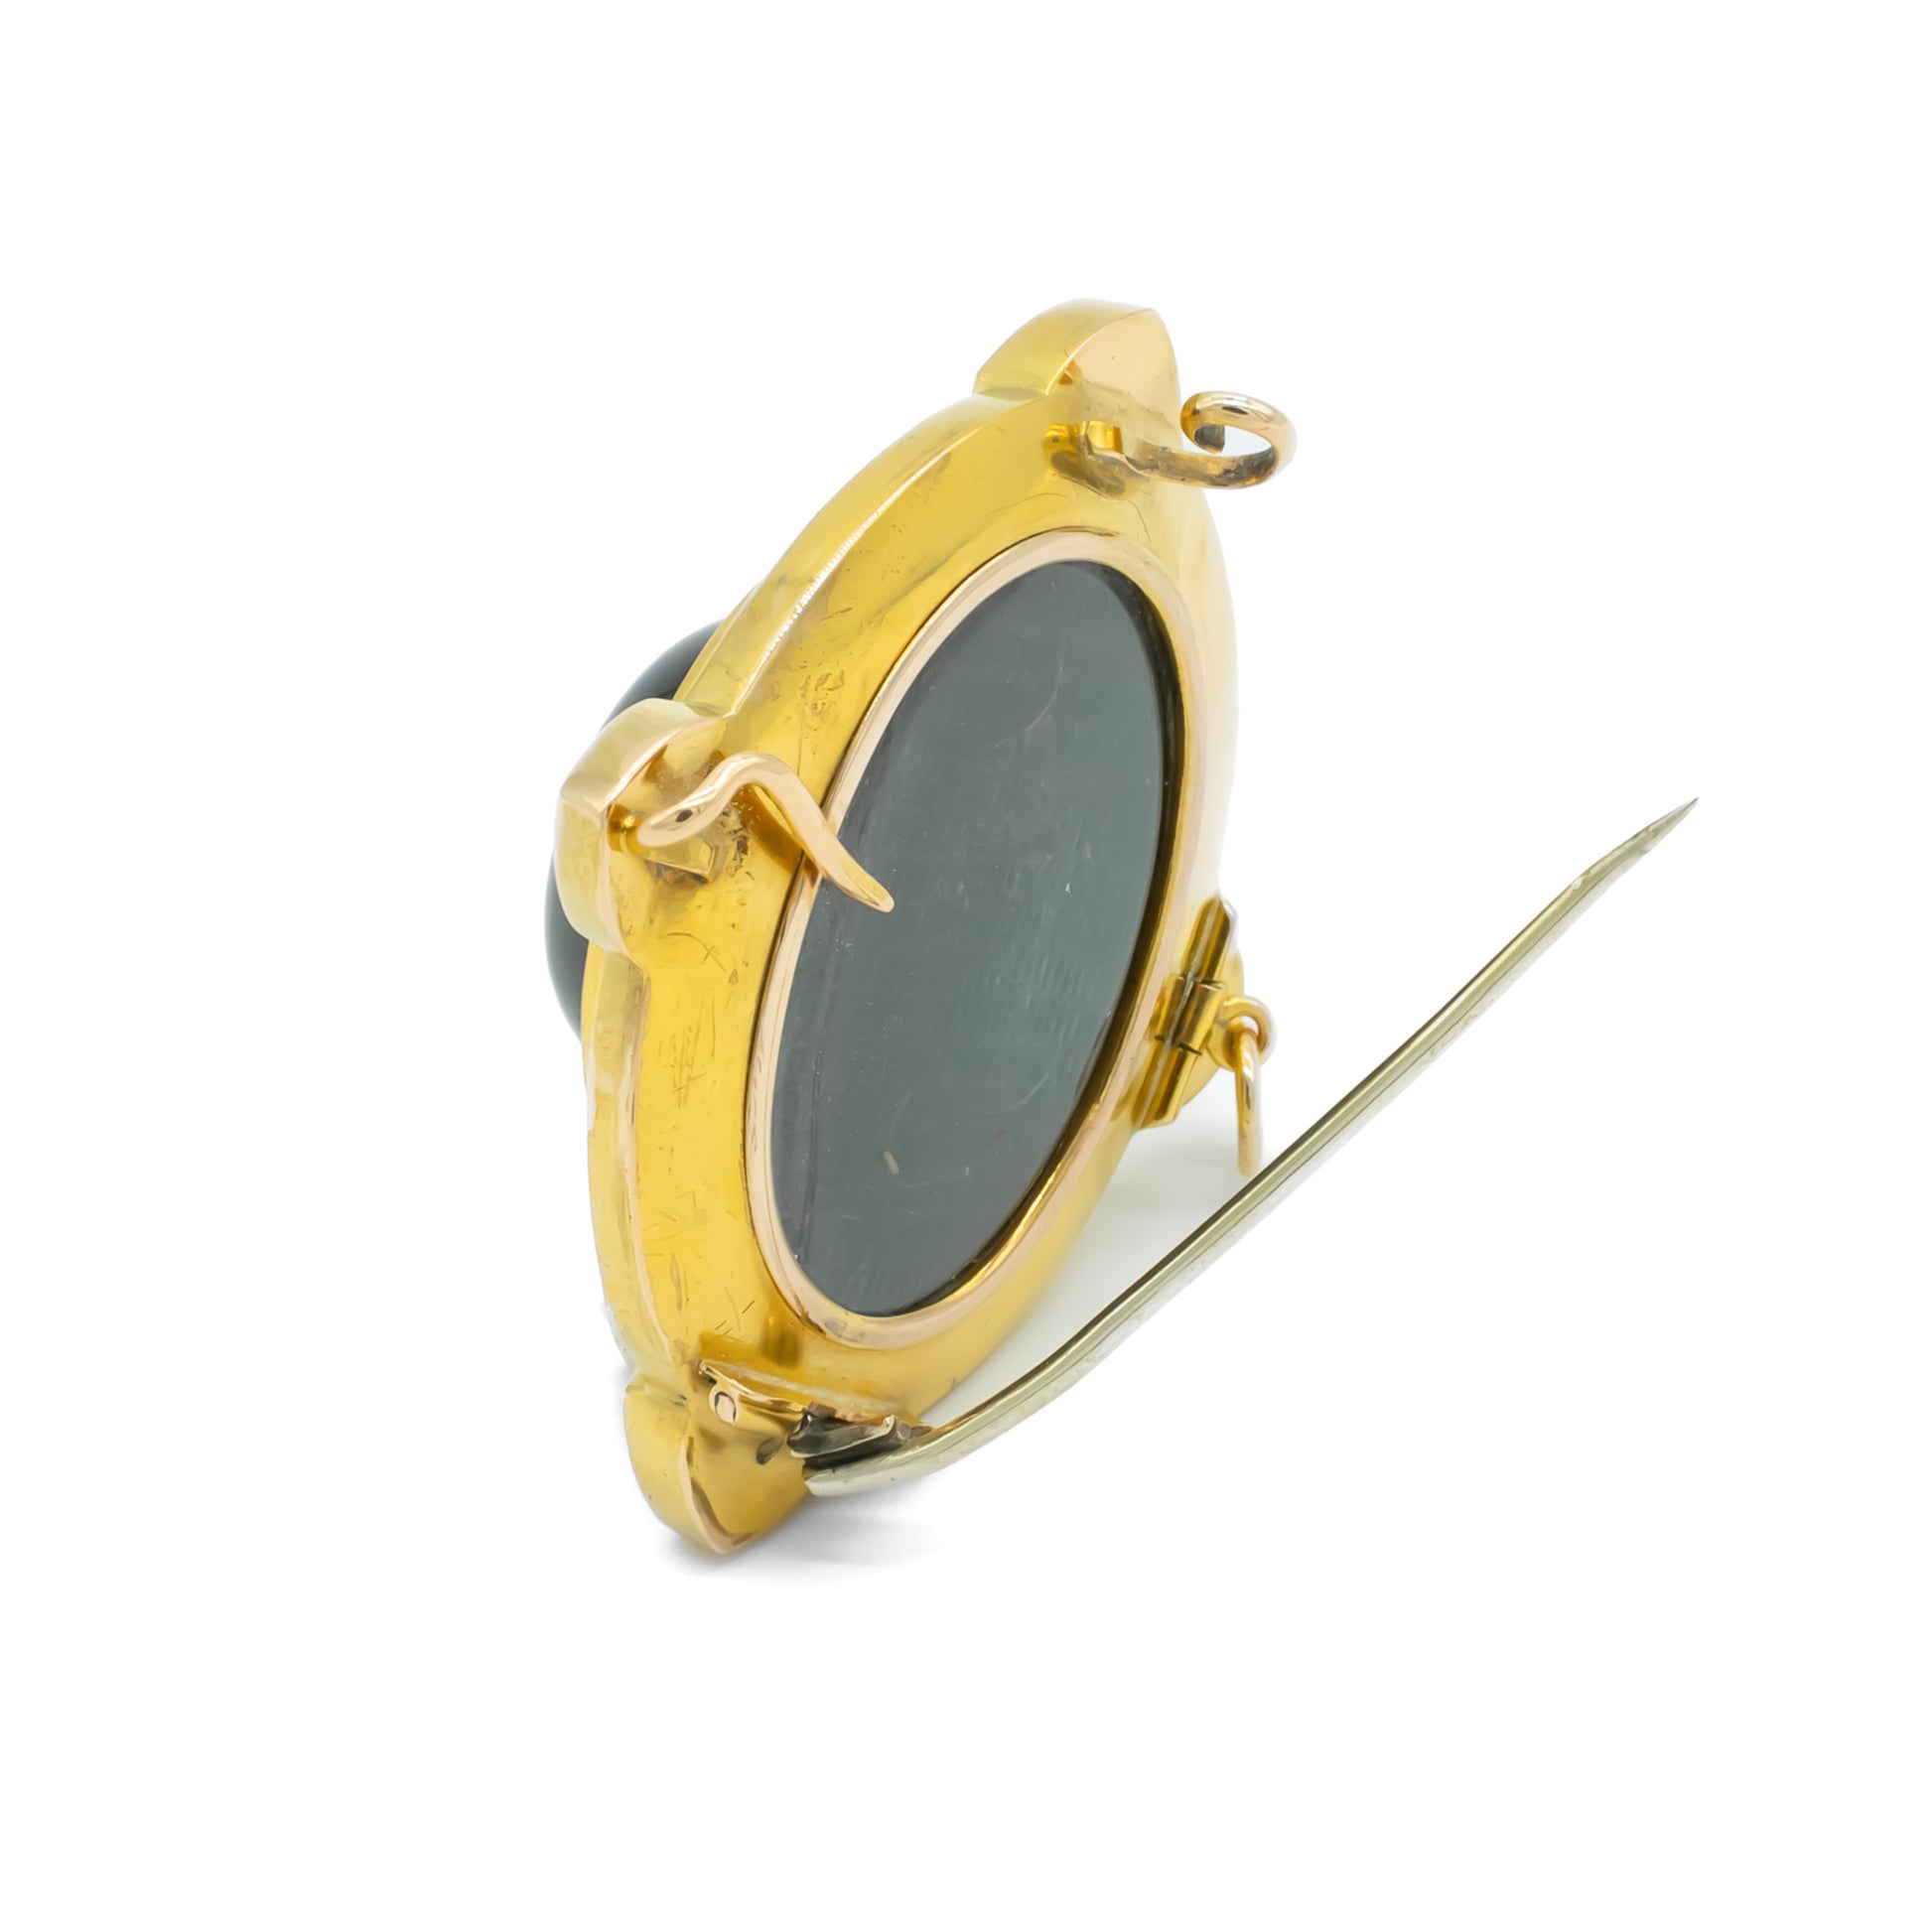 Stunning Victorian 15ct yellow gold pendant/brooch with large oval cabochon garnet, beautiful blue and white enamelling and fine leaf engravings.